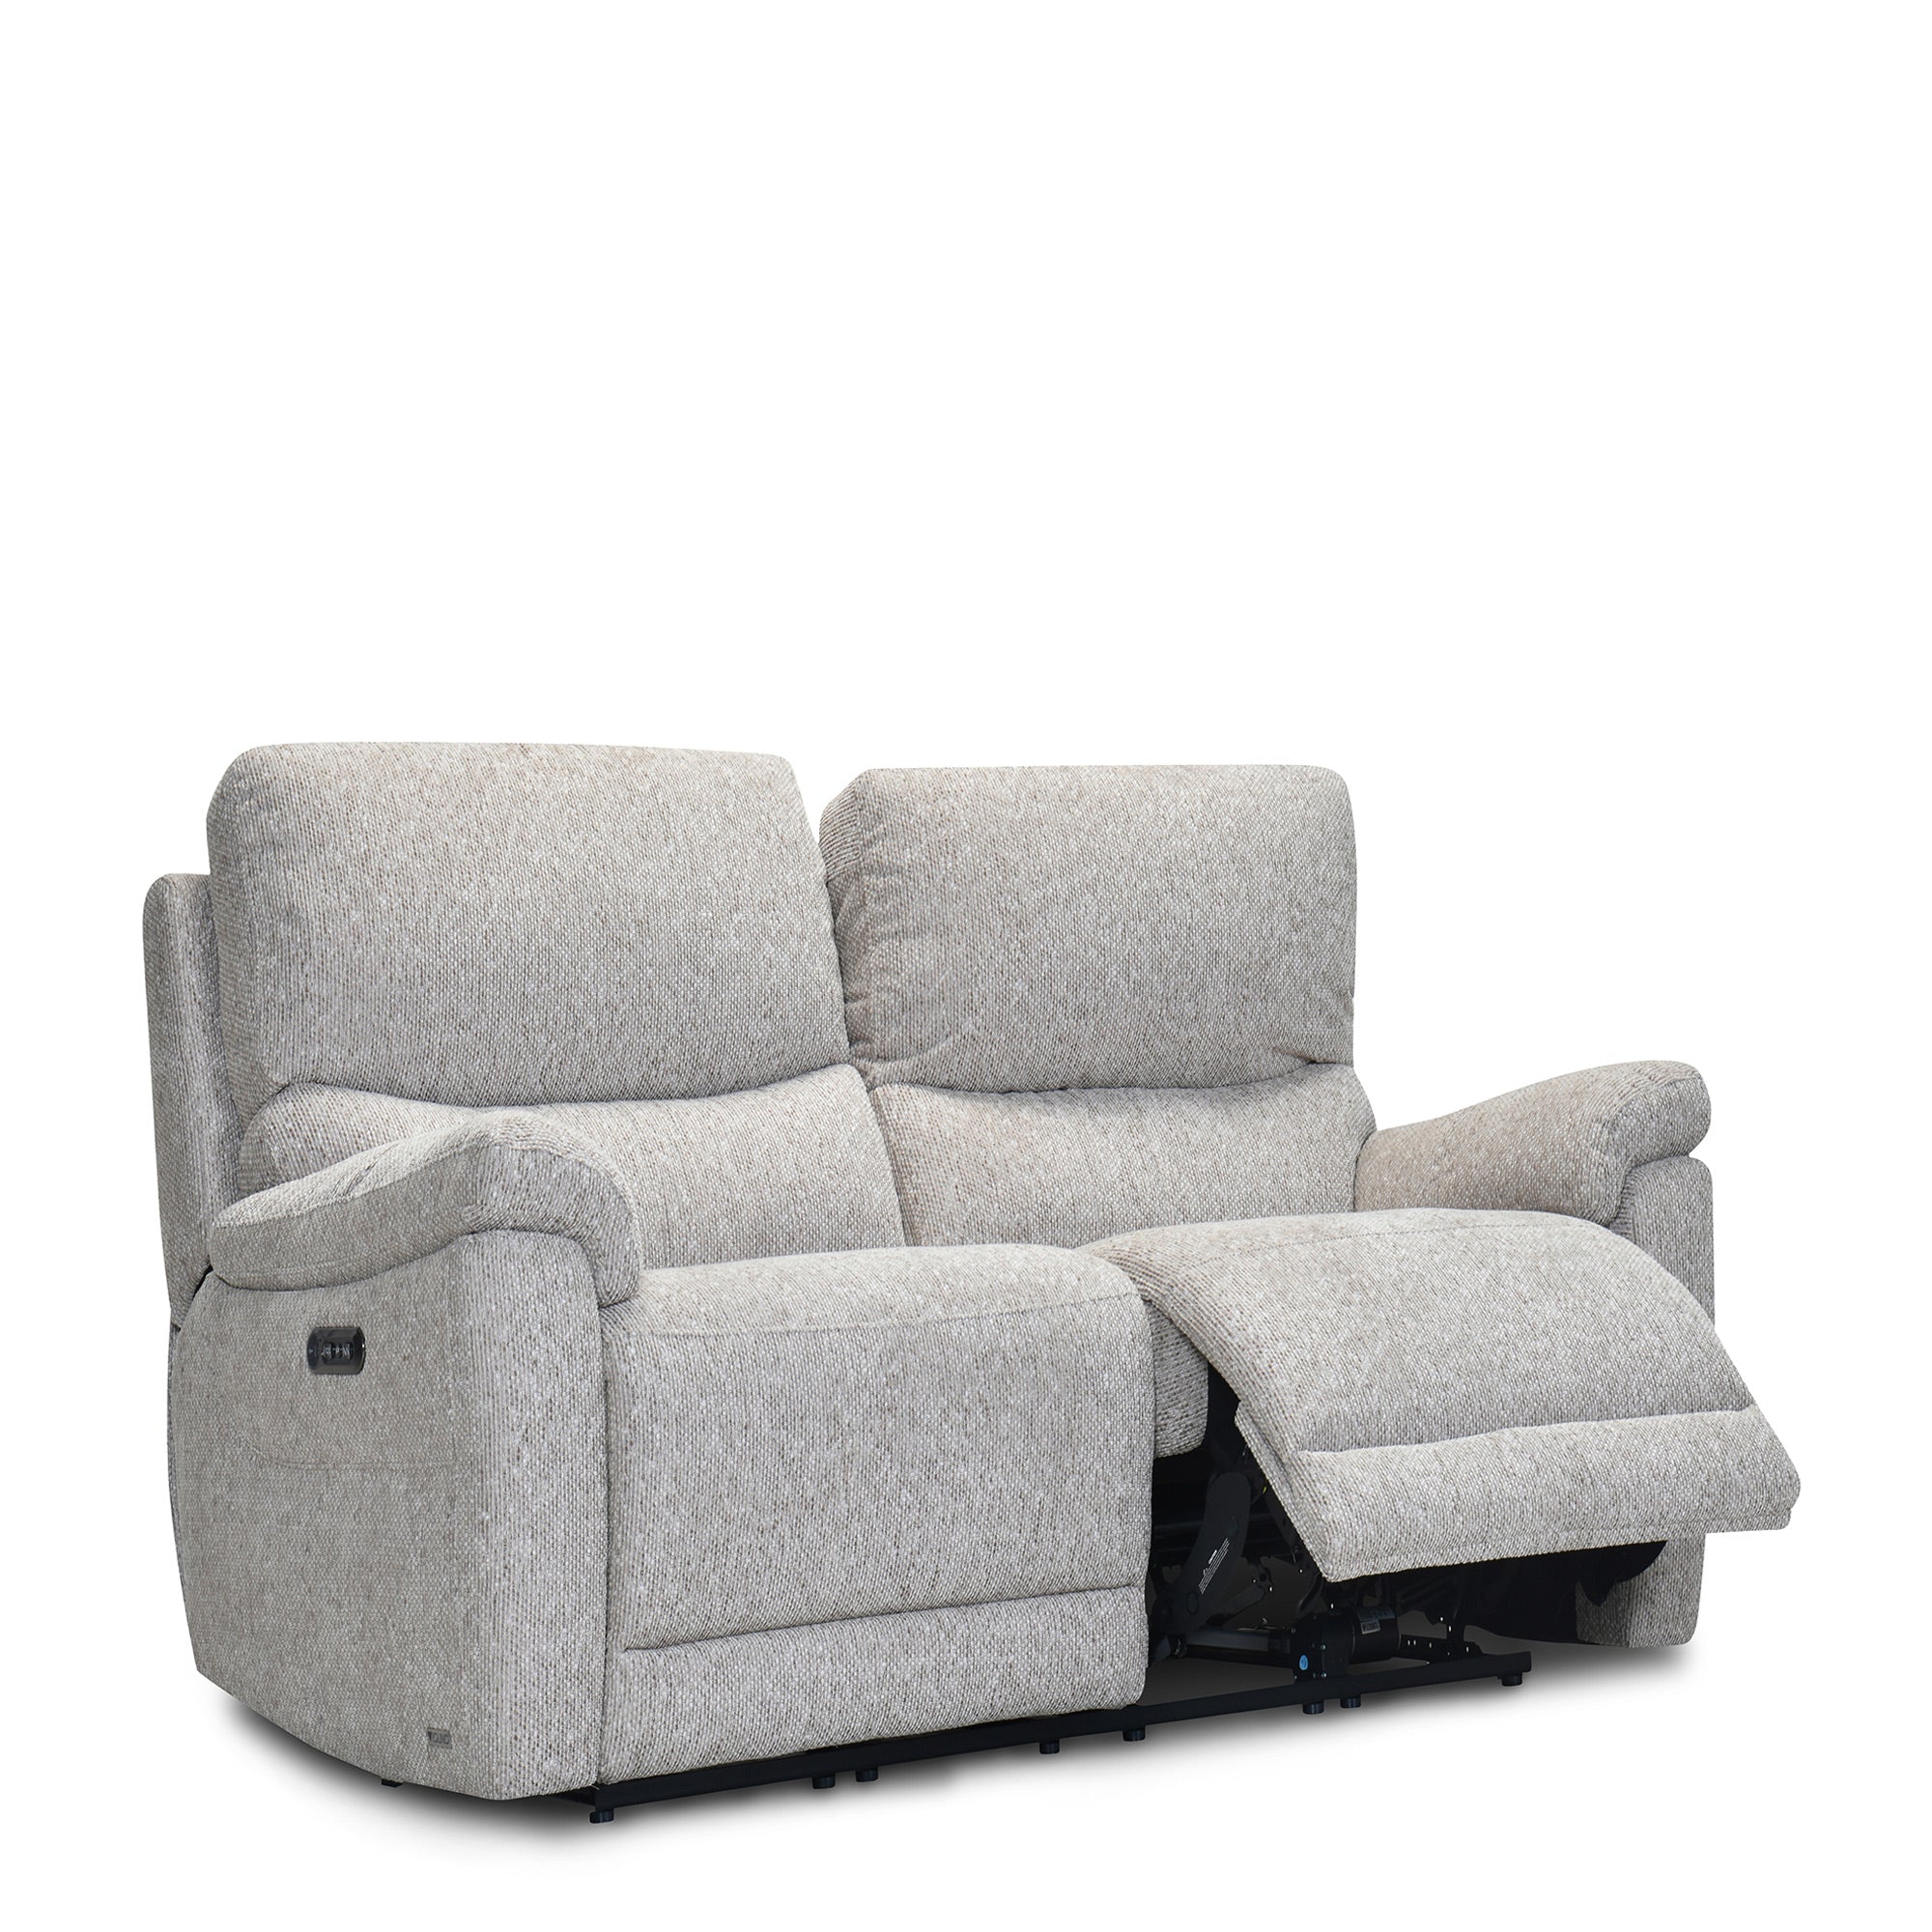 2 Seat Sofa With Power Recliners In Fabric BSF30